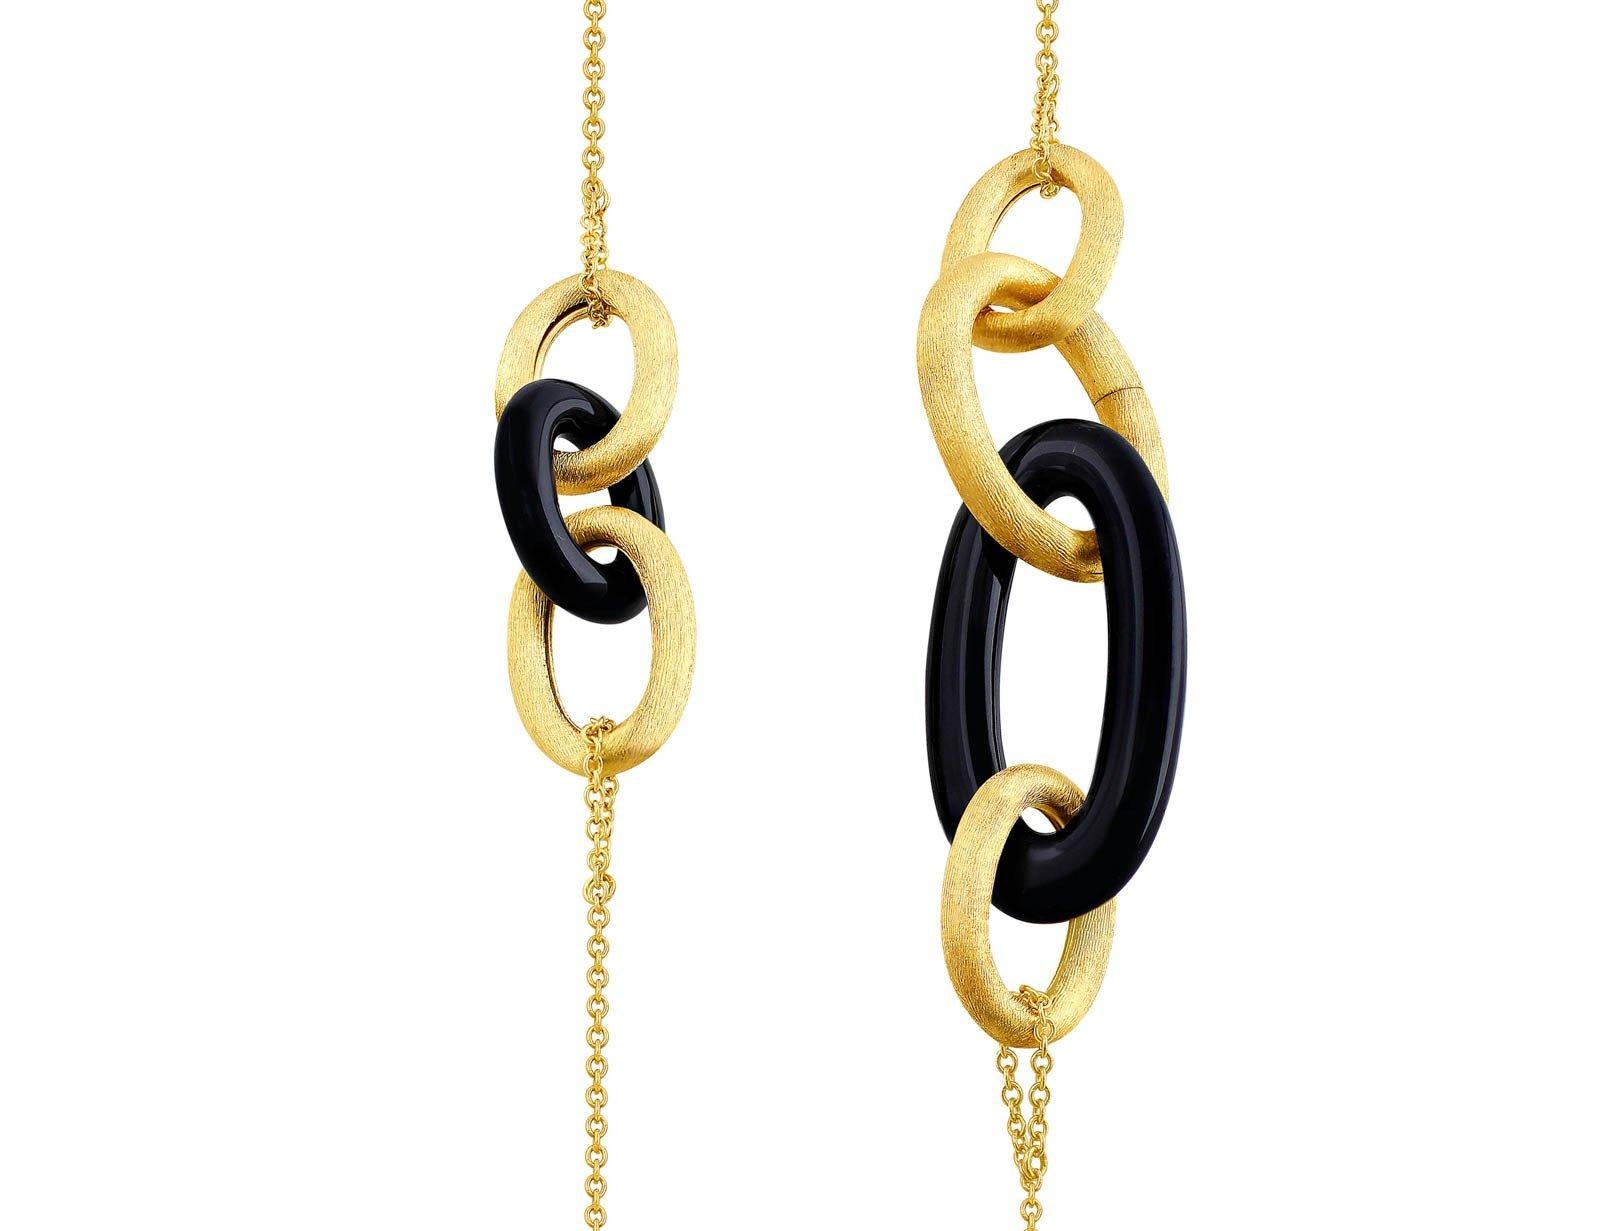 18kt yellow gold & onyx contemporary necklace. This long necklace has large yellow gold chain links with brush finish intermixed with large onyx links.